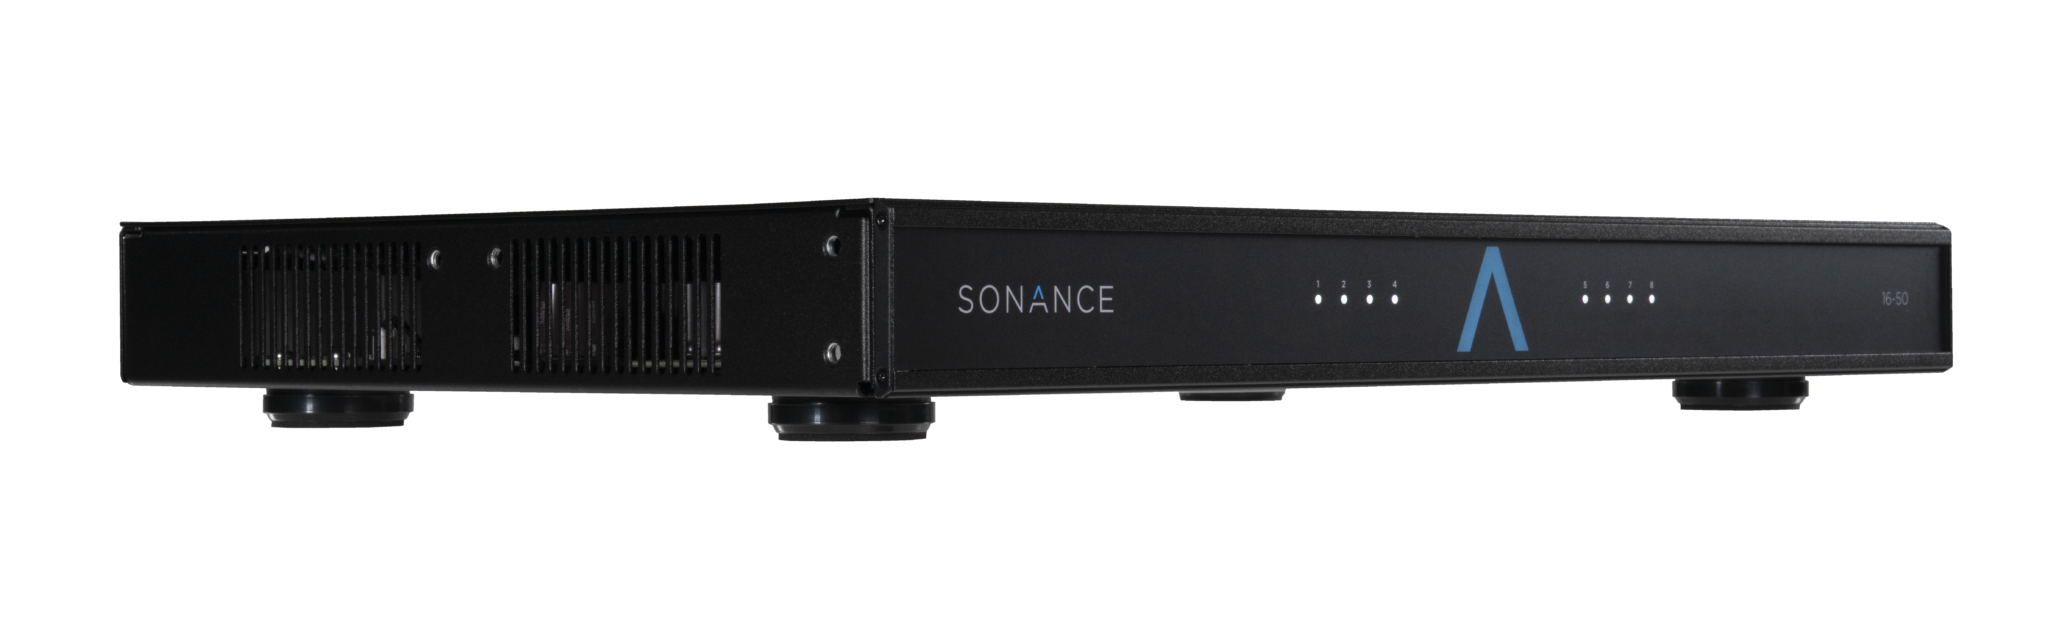 Sonance Showcases Host of New Products